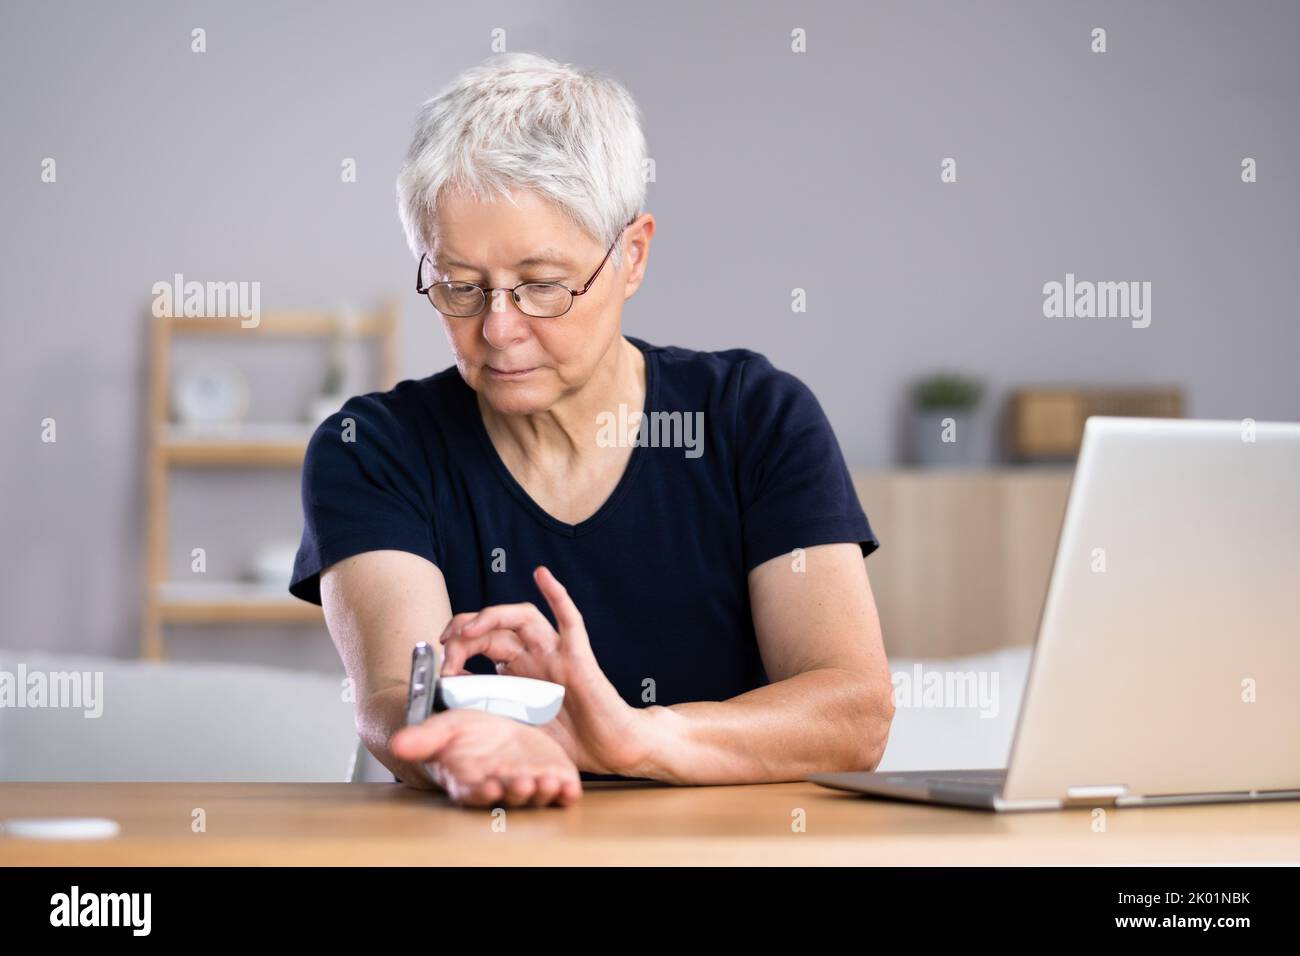 Self Testing Blood Pressure. Medical Healthcare Devices Stock Photo